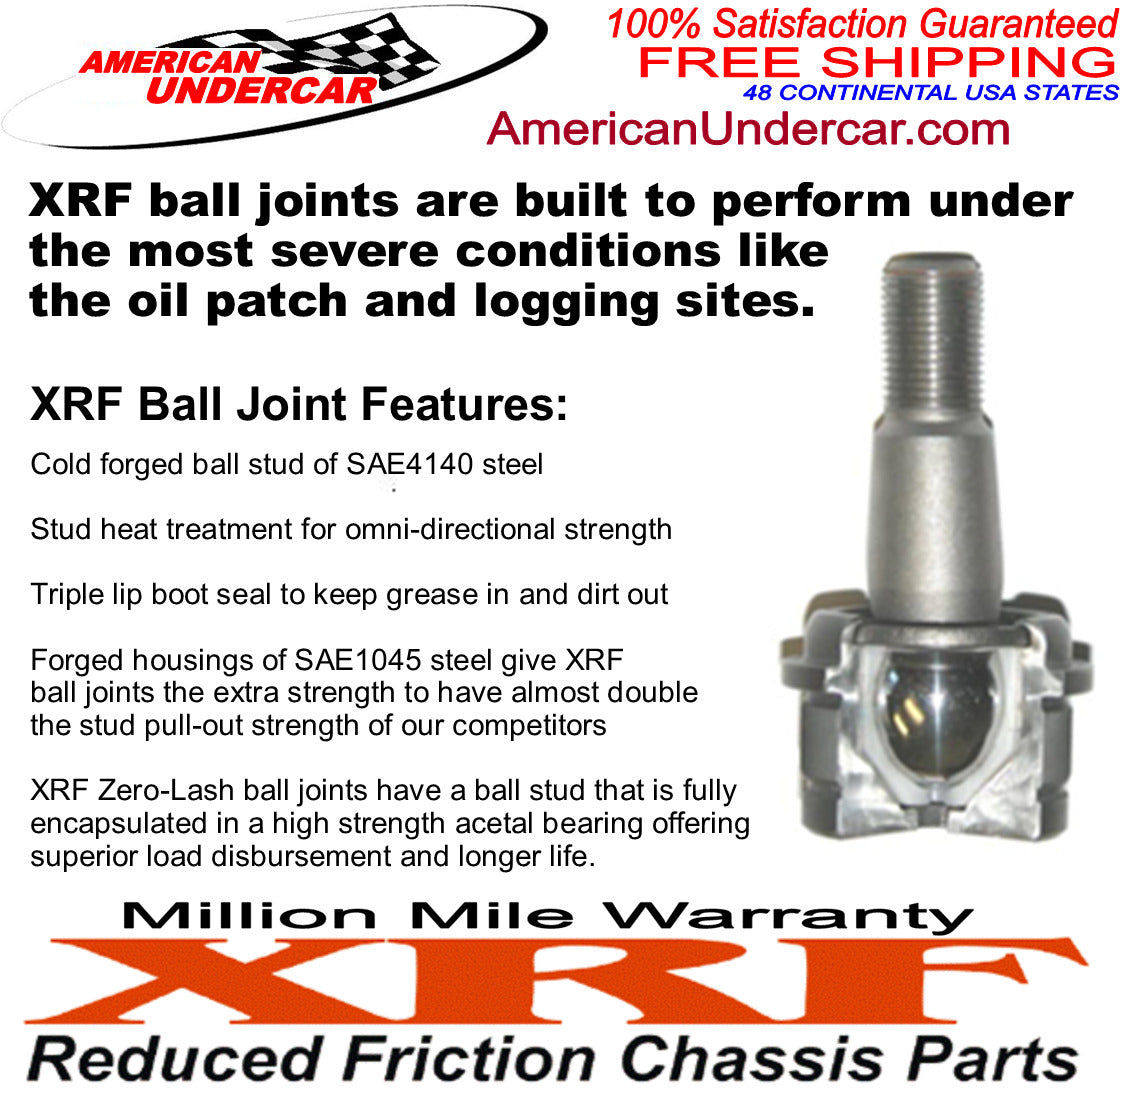 XRF Upper Control Arms Ball Joints & Bushings Kit for 2014-2018 Cadillac, Chevrolet, GMC, 2WD, 4x4